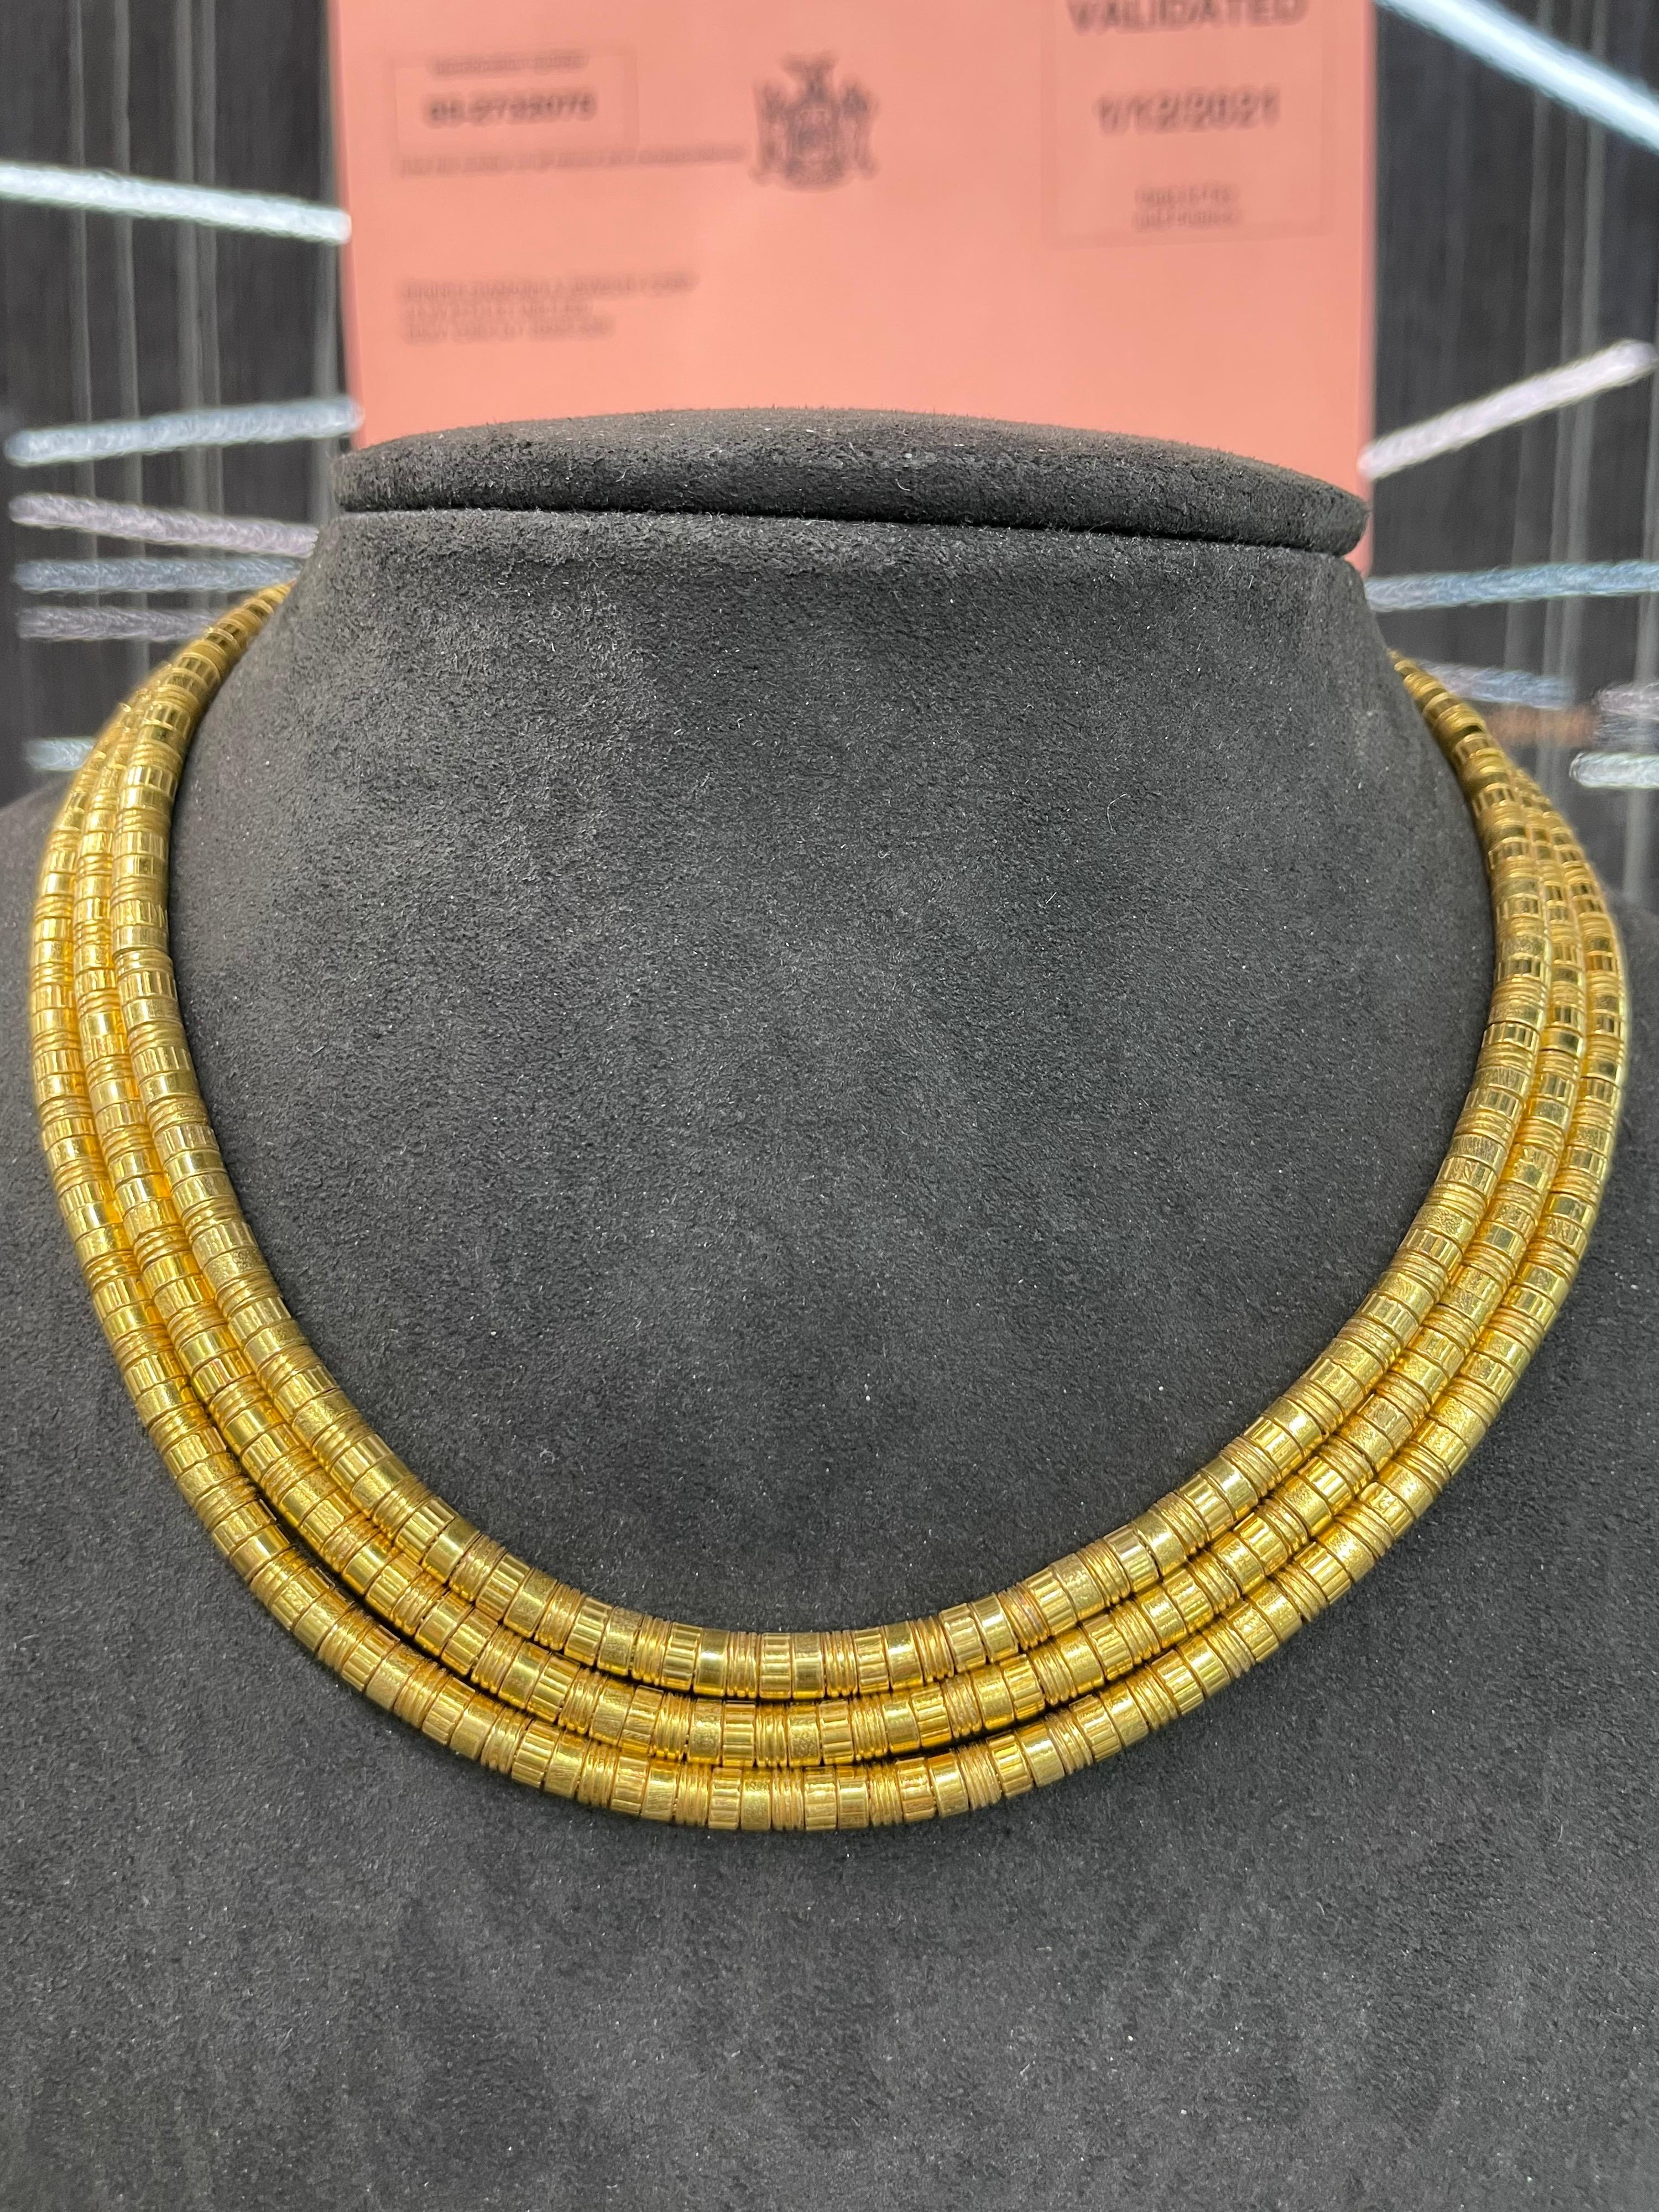 Stamped Ilias Lalaounis Greece 750, this collar necklace features three rows of tube beads and weighs 127 grams.
Very comfortable on the neck. 